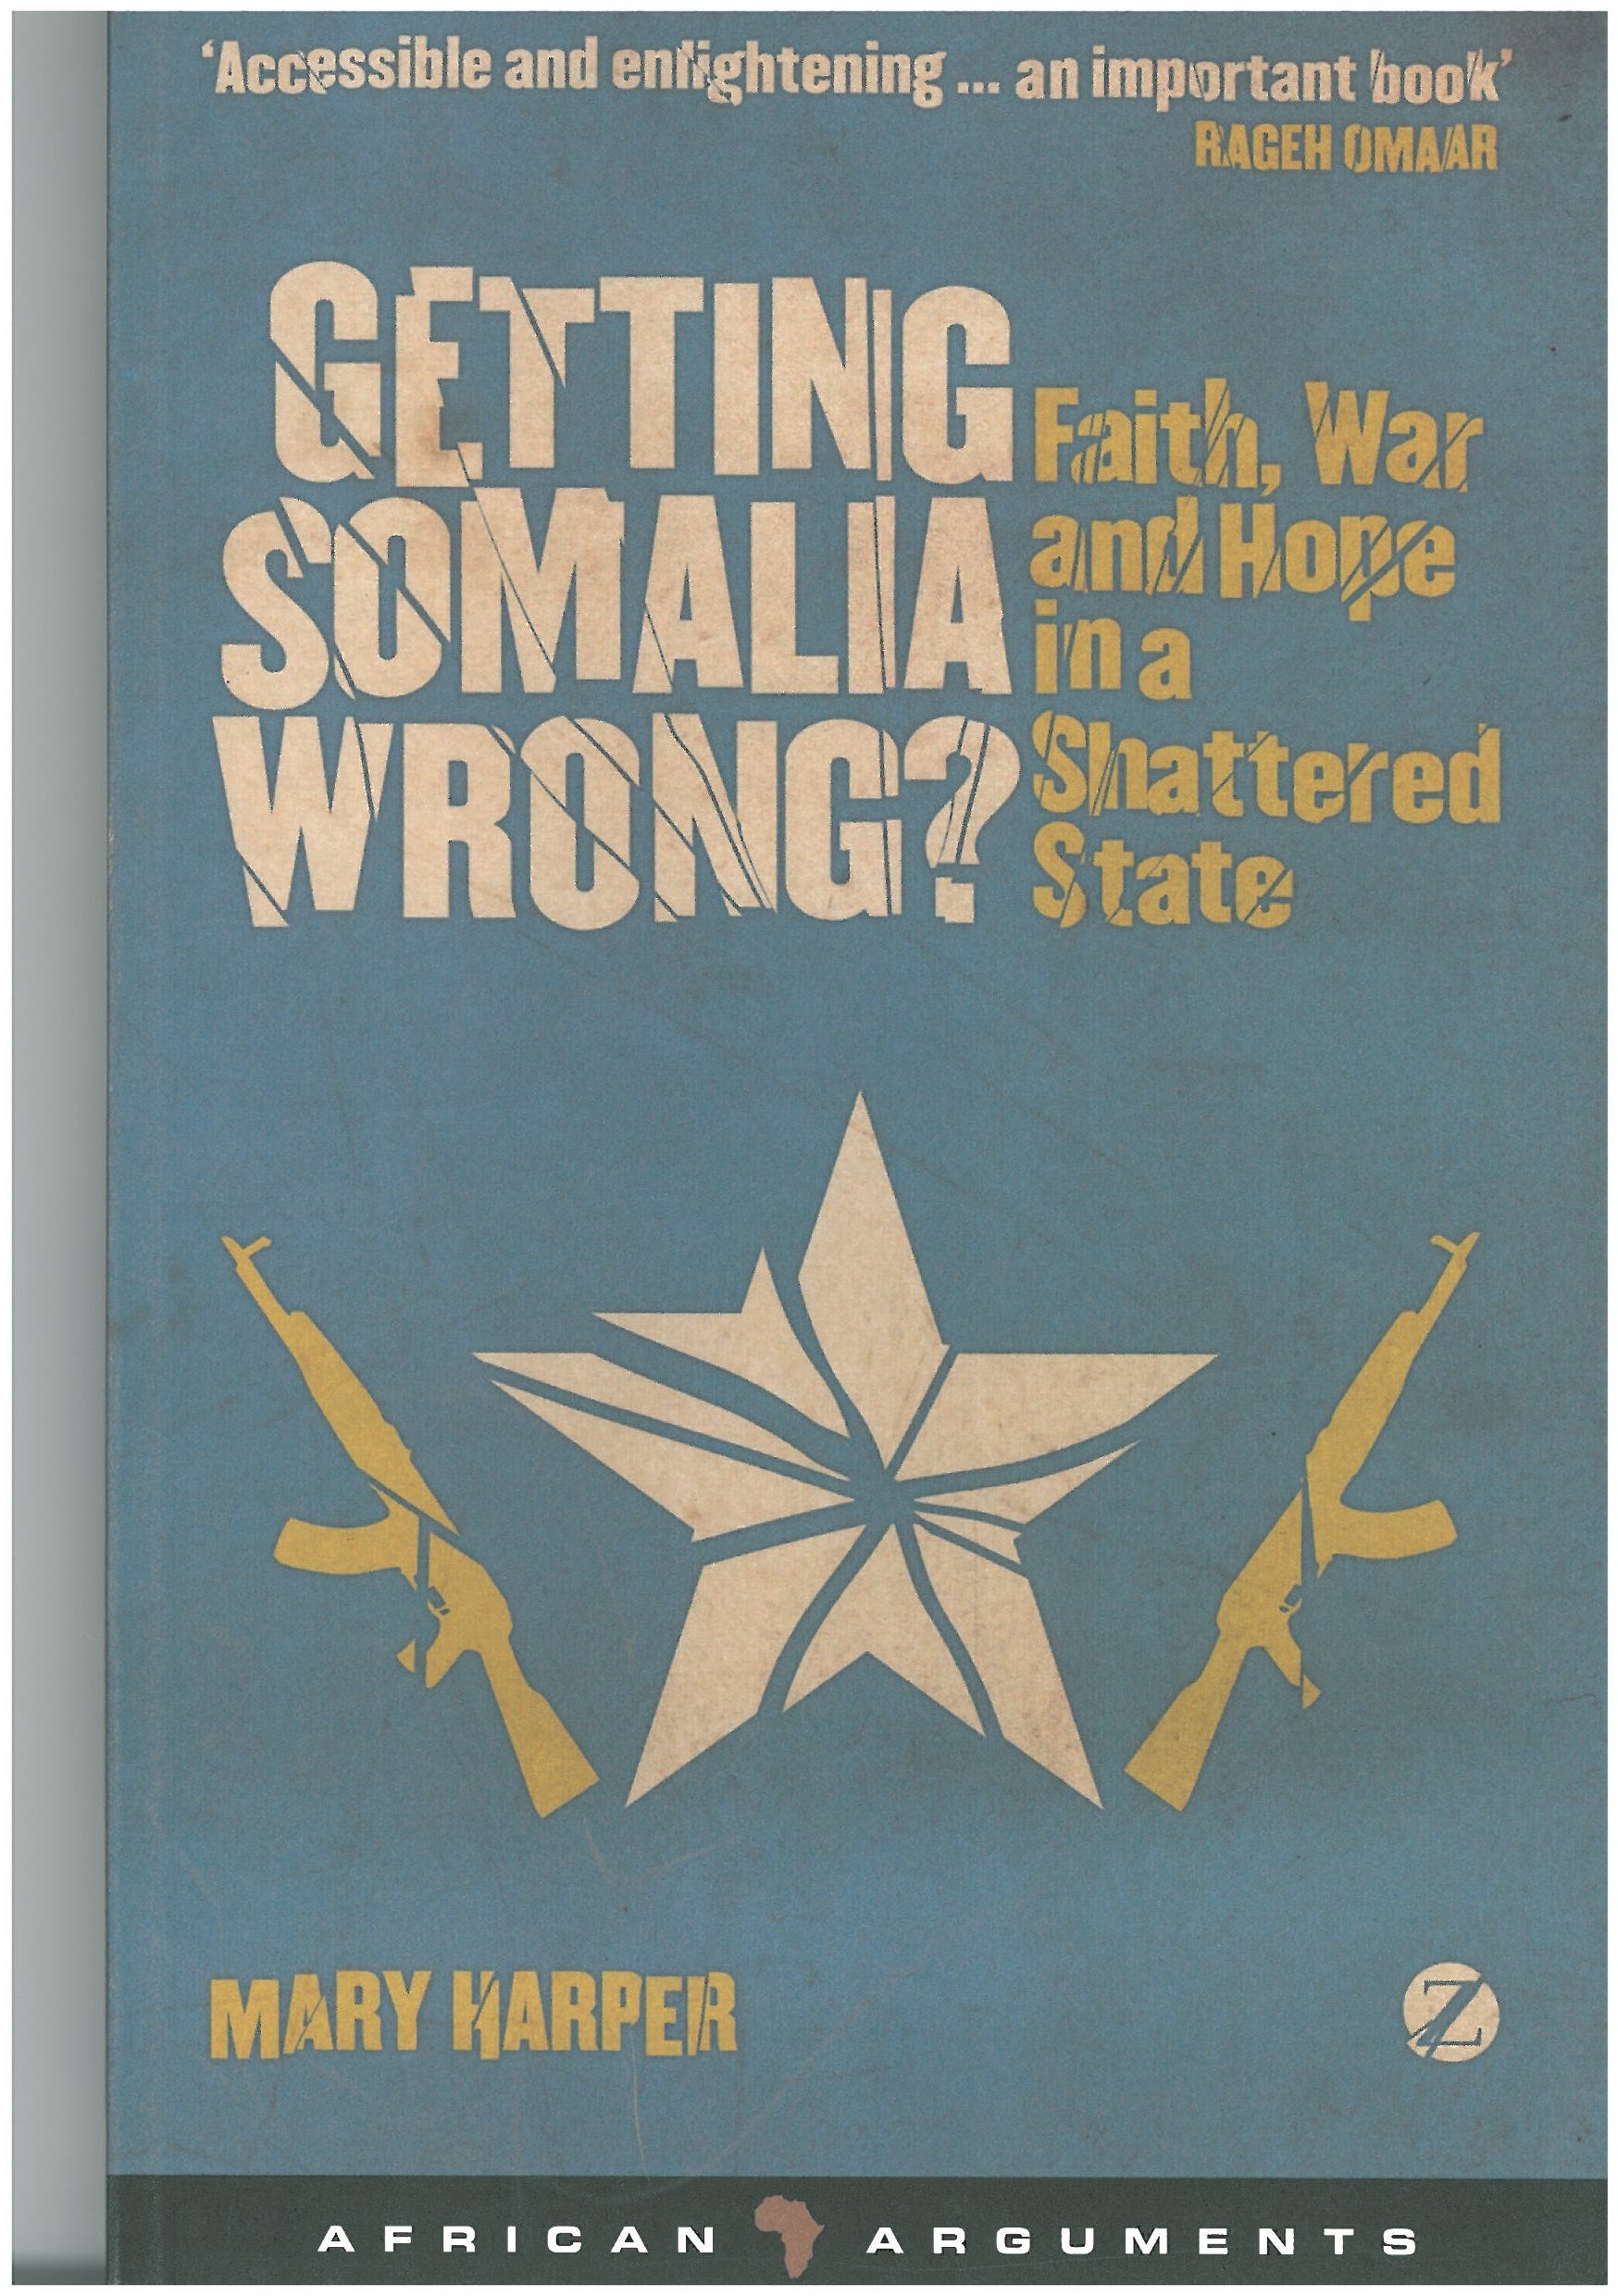 Mary Harper: Getting Getting Somalia Wrong? Faith, War and Hope in a Shattered State. Zed Books 2012,217 s.